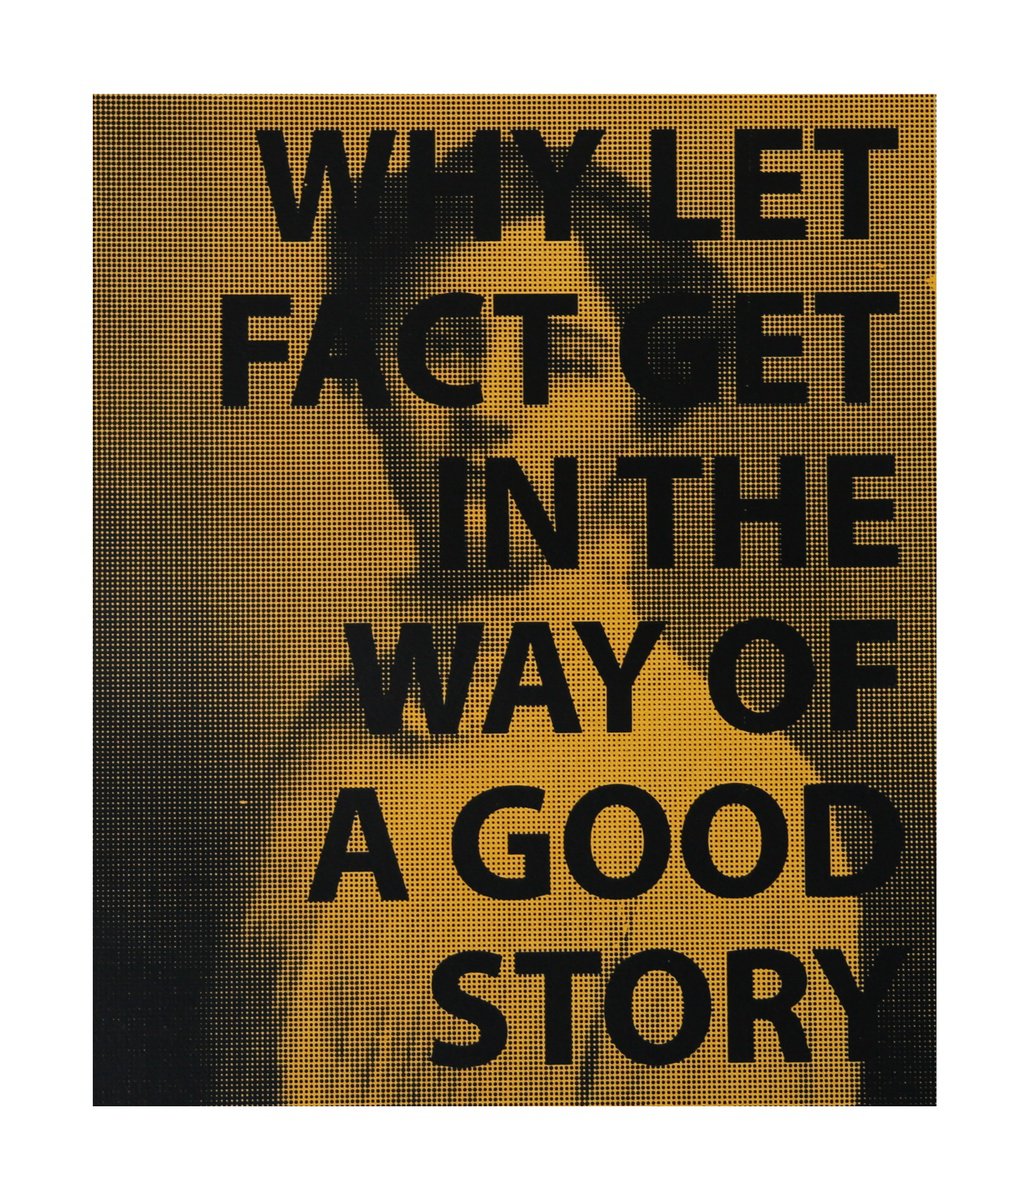 WHY LET FACT GET IN THE WAY OF A GOOD STORY by AAWatson